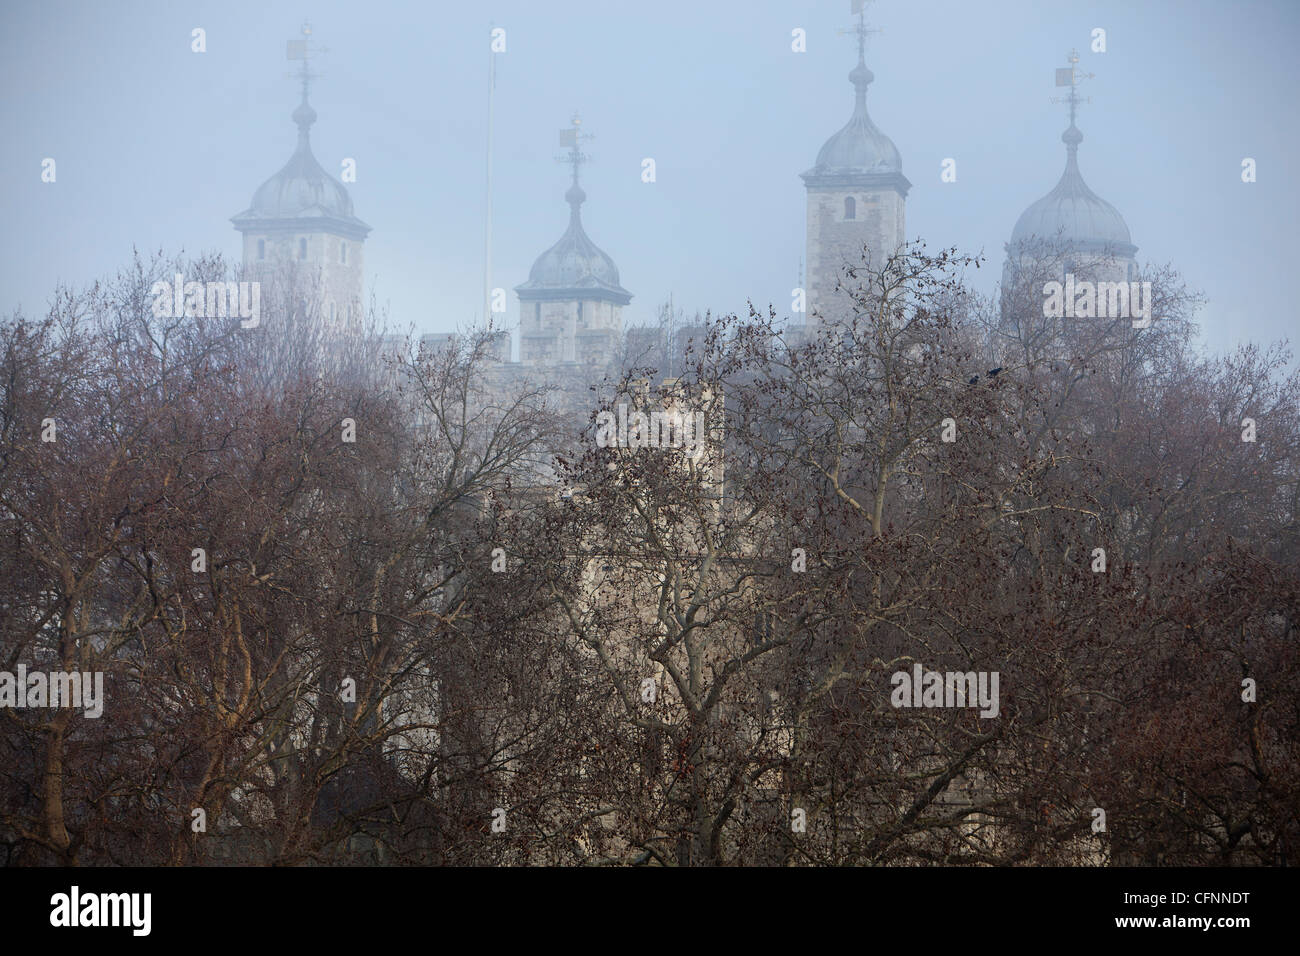 The turrets of the Tower of London in morning mist Stock Photo